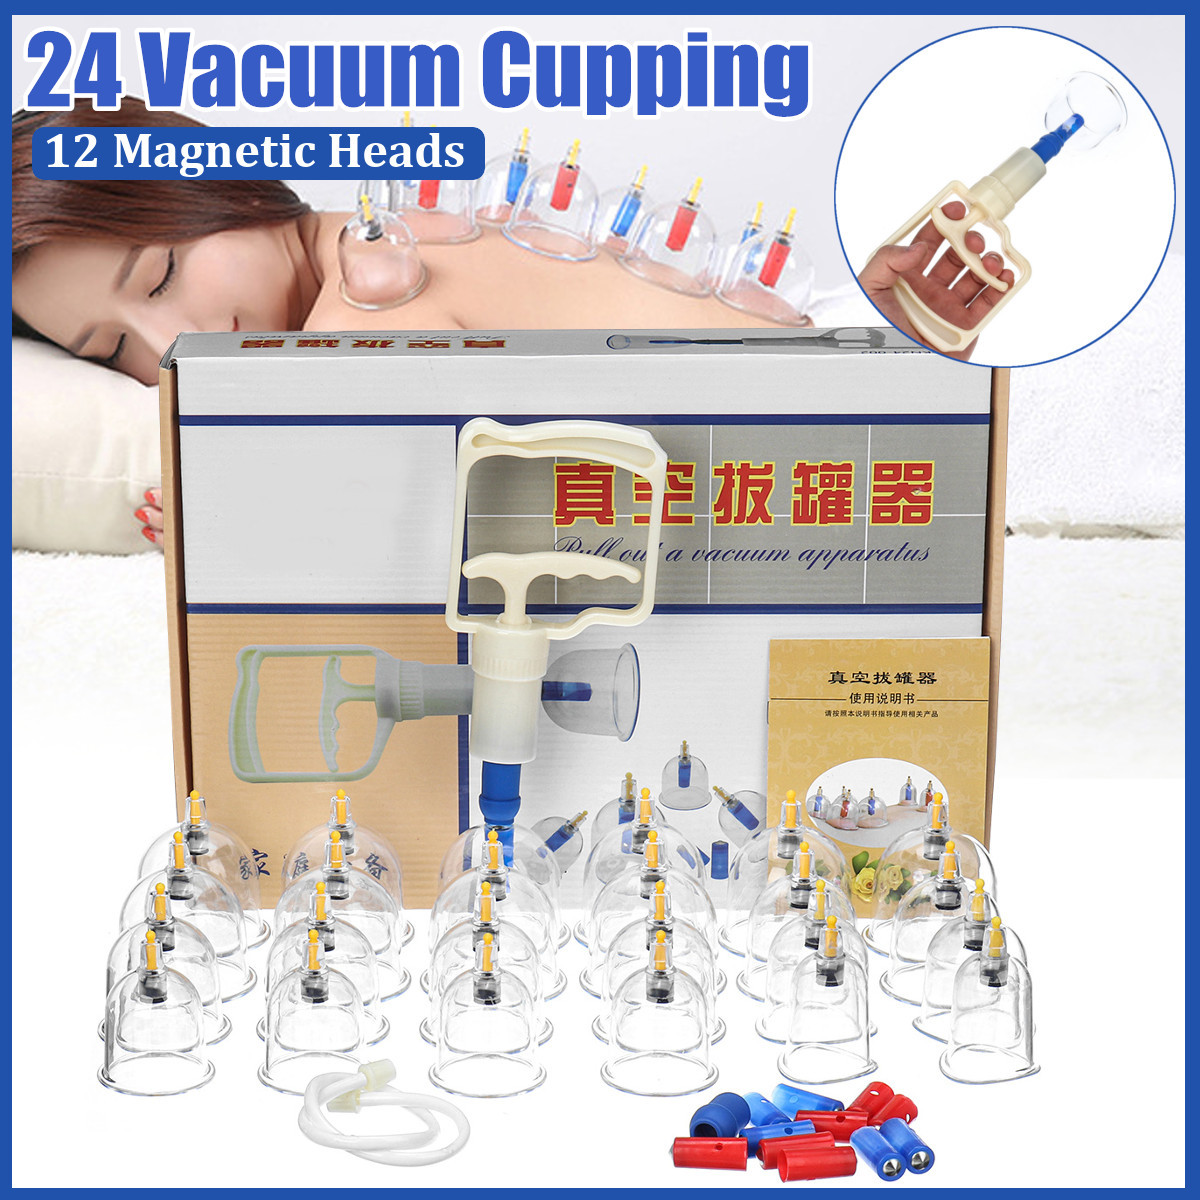 24-Cup-Vacuum-Cupping-Set-Massage-Acupuncture-Kit-Suction-Massager-Pain-Relief-Device-1693771-1